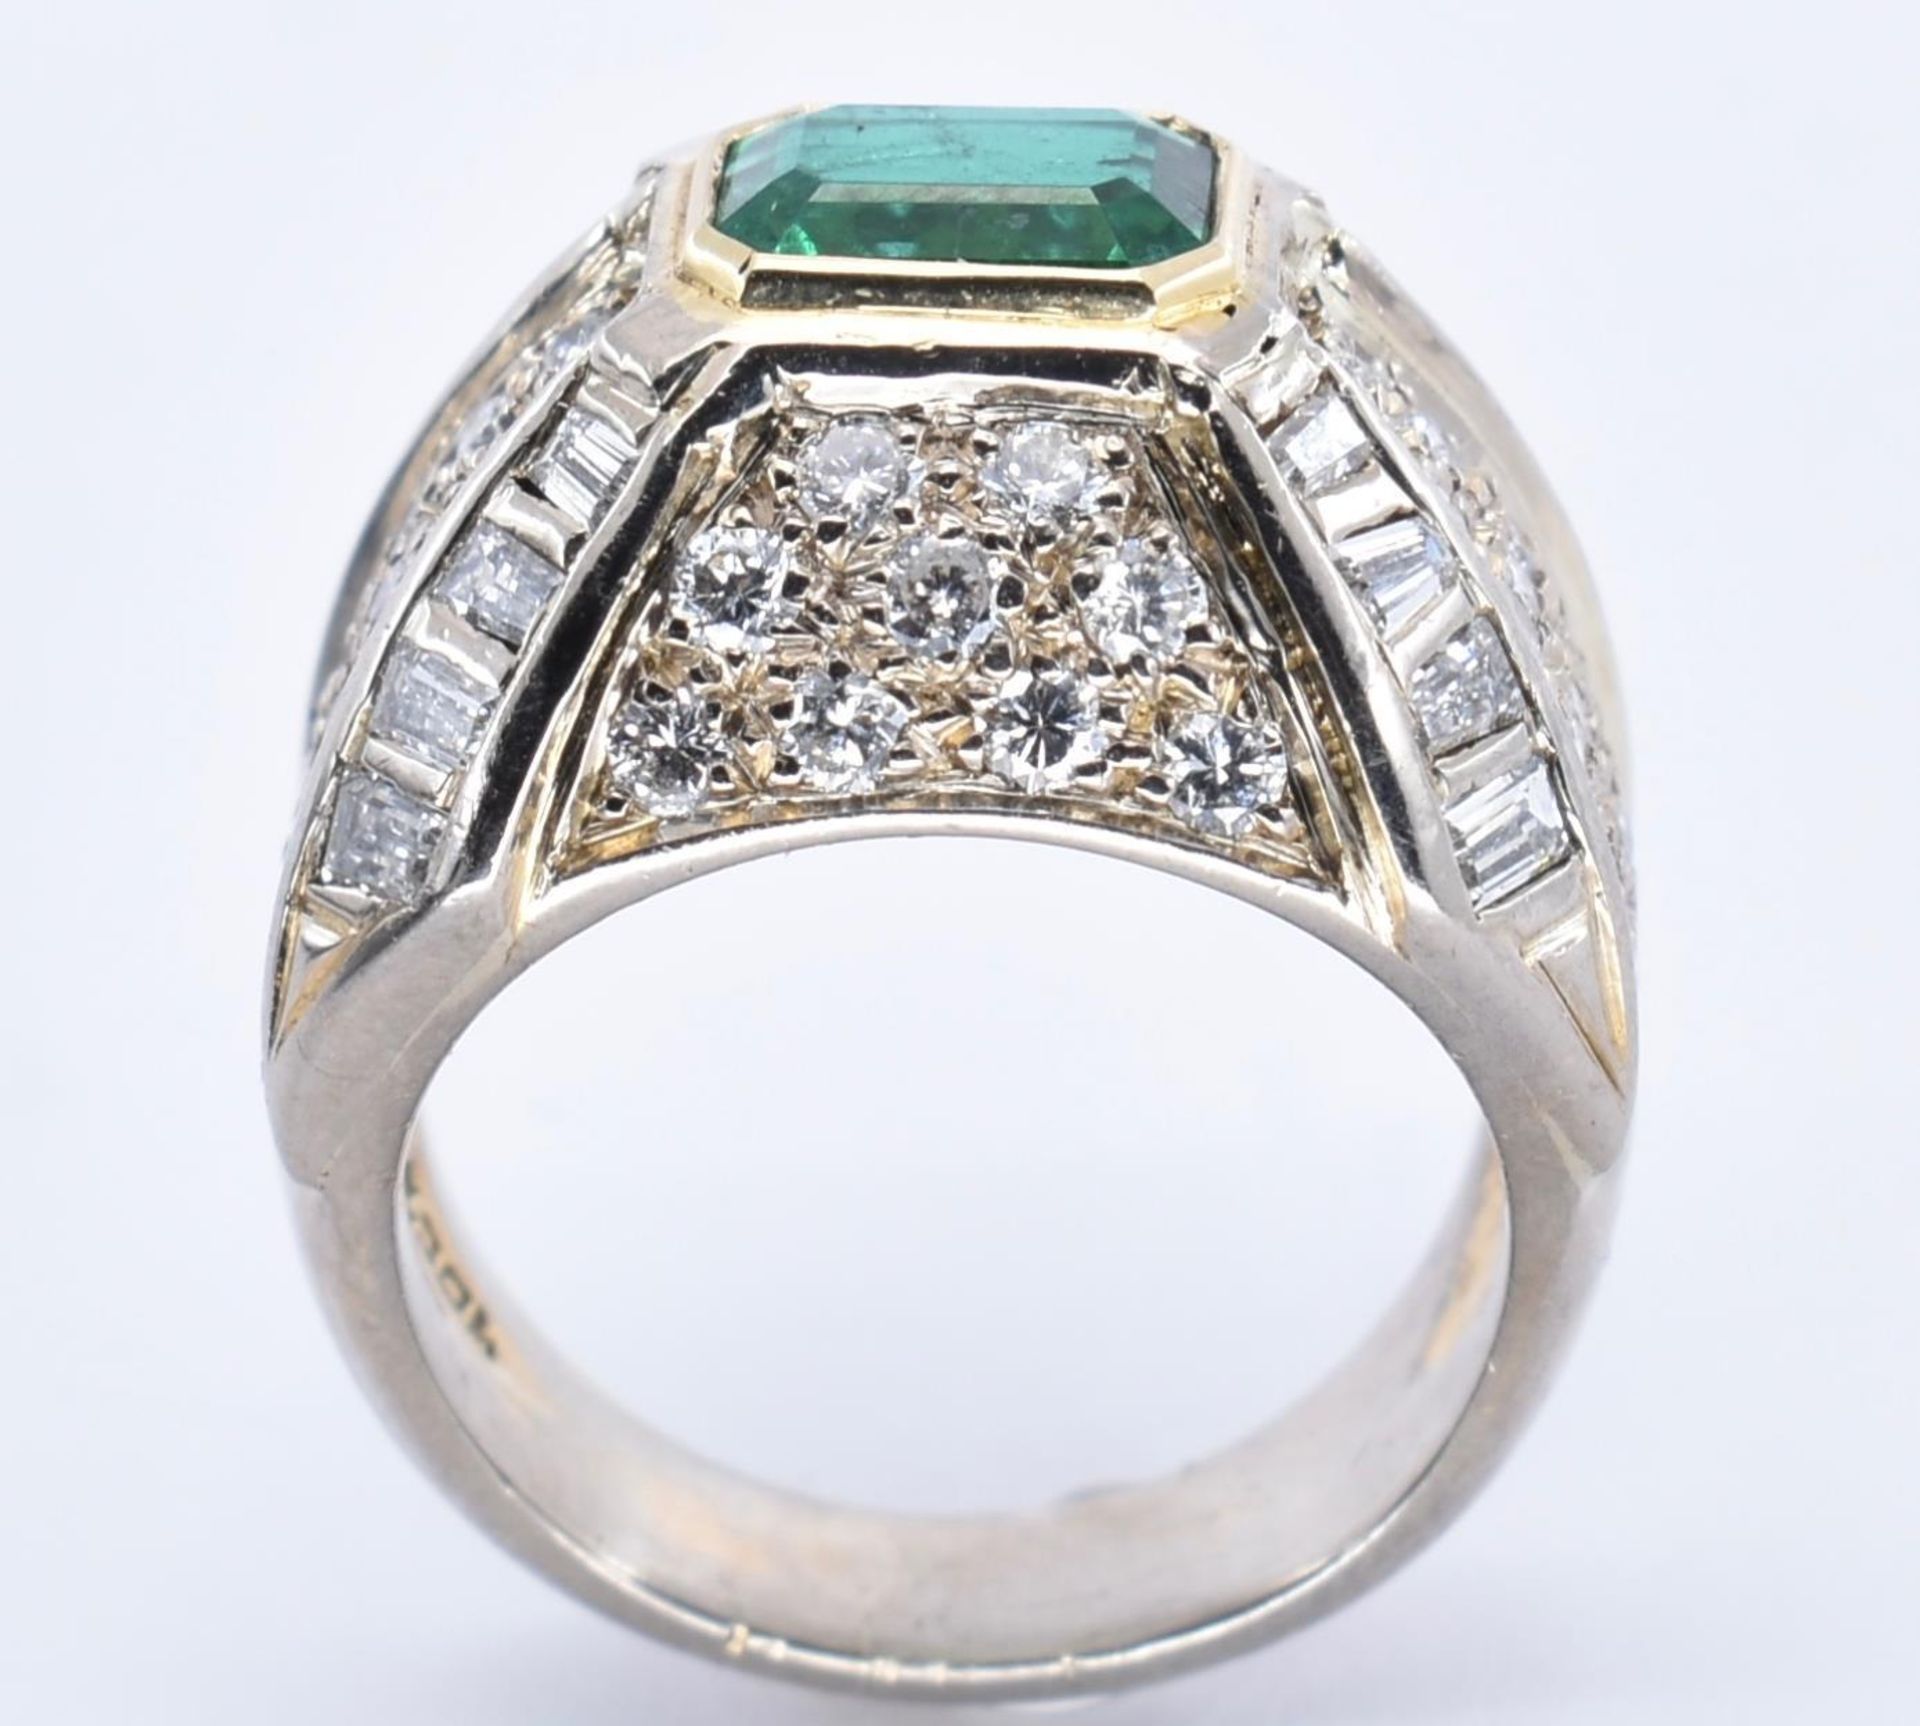 18CT GOLD EMERALD AND DIAMOND SET BOMBE RING - Image 6 of 7